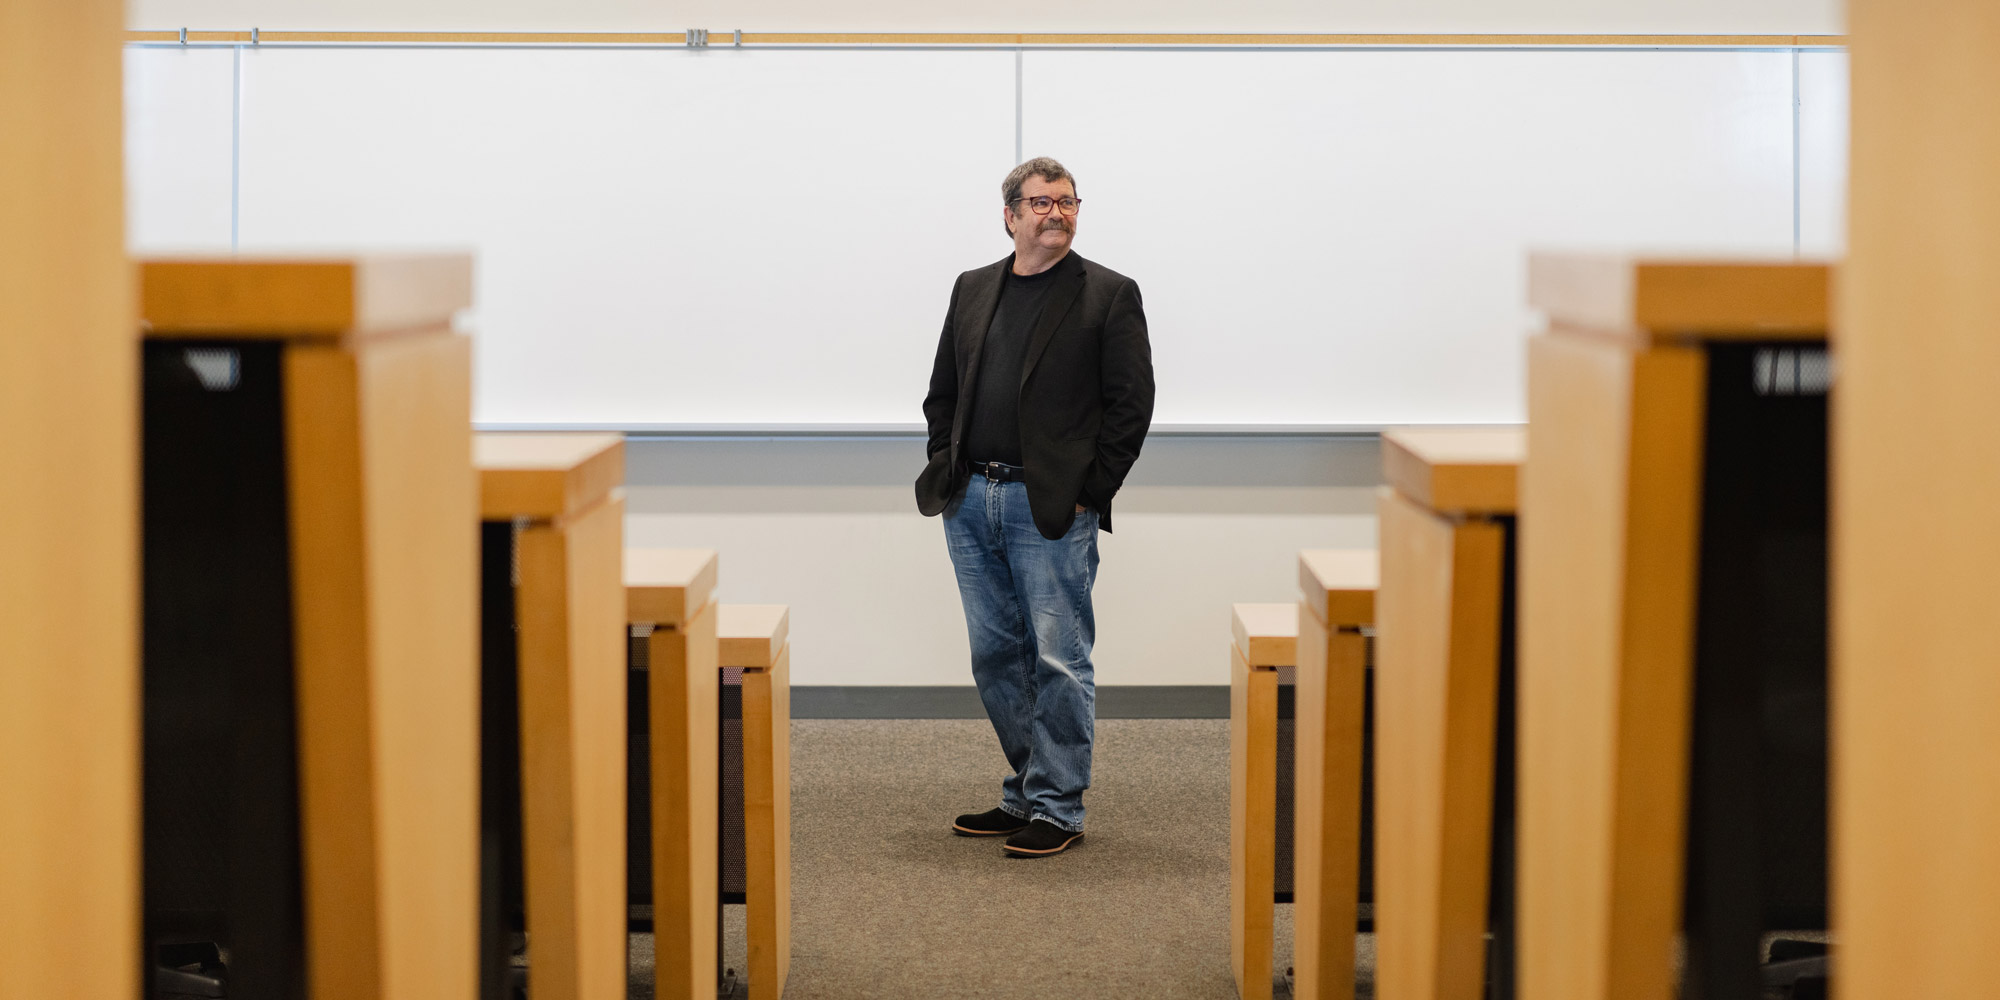 Glenn Hanna standing at the front of the classroom, framed by the aisle.